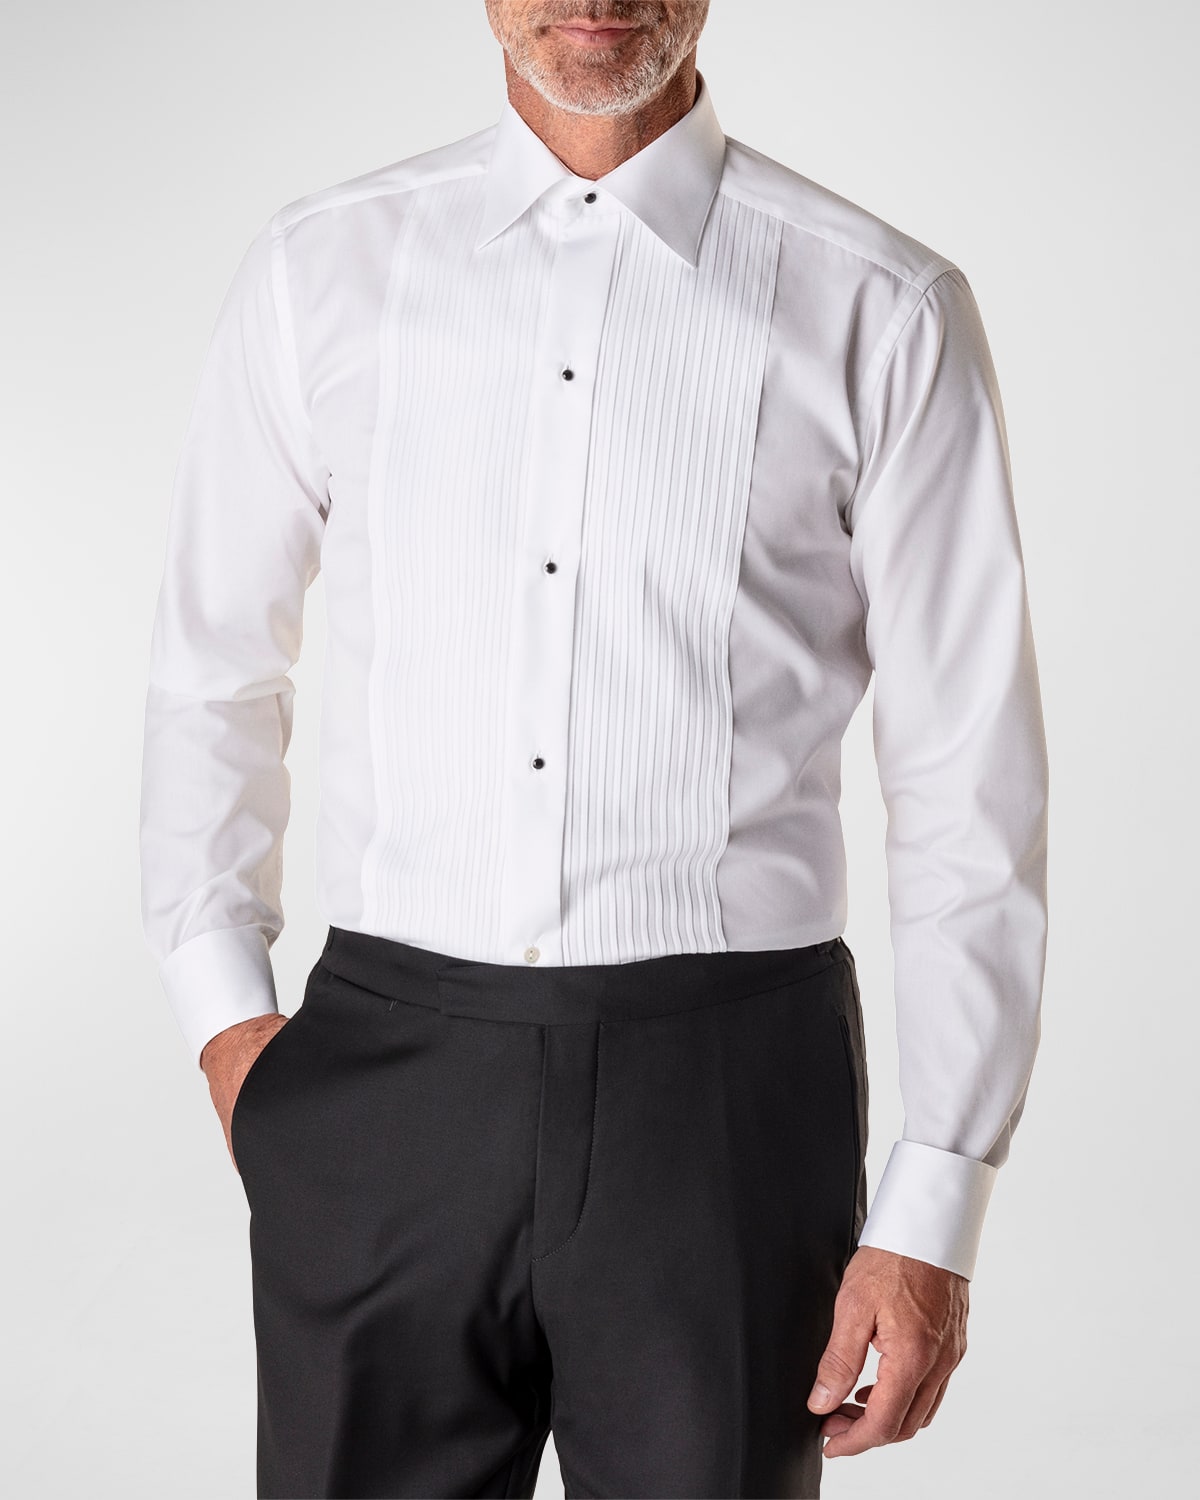 Contemporary-Fit Pleated Bib Formal Shirt